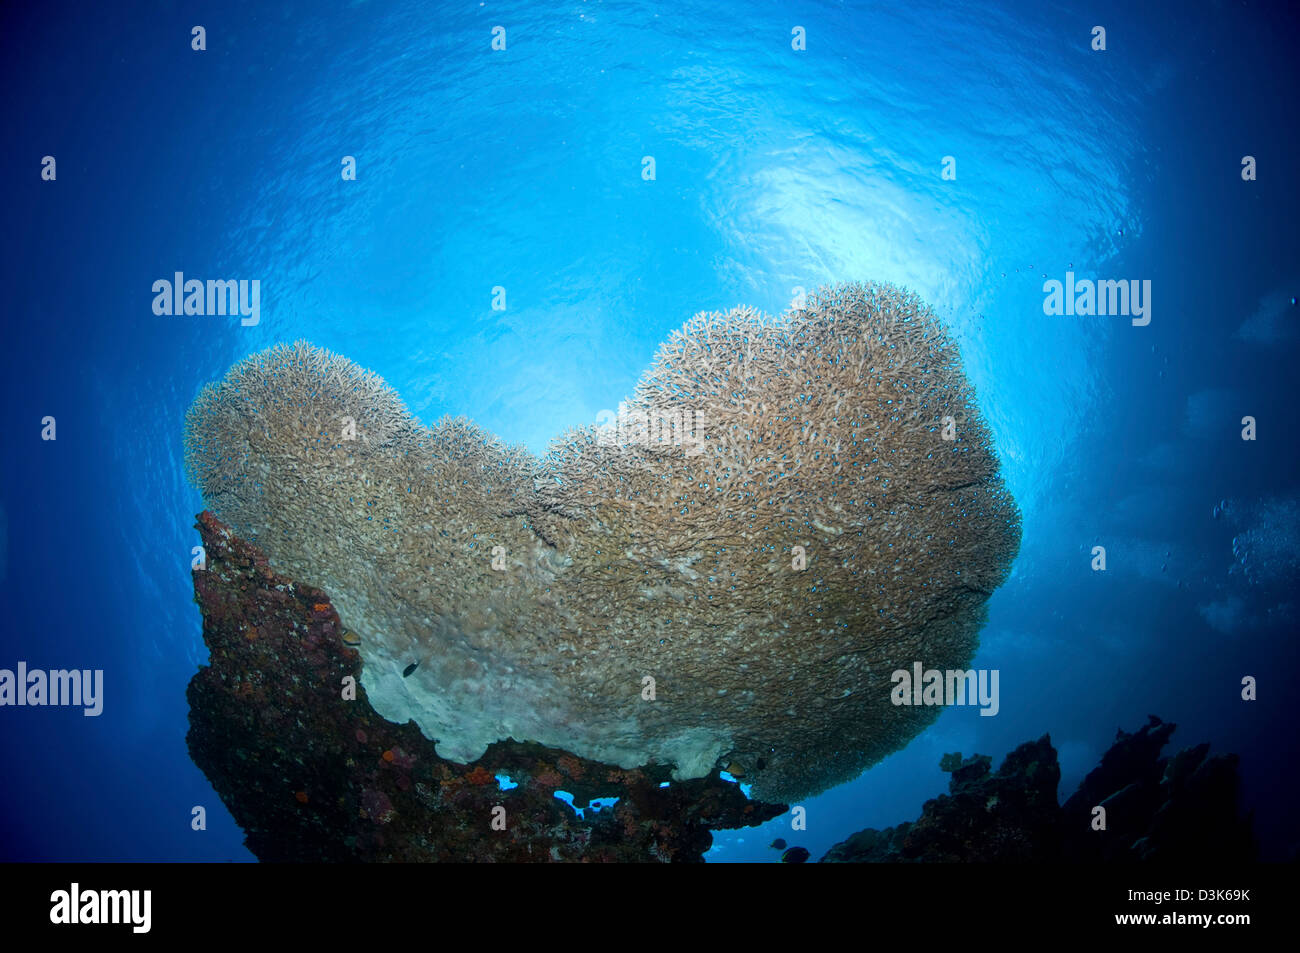 Large staghorn coral viewed from below, Christmas Island, Australia. Stock Photo